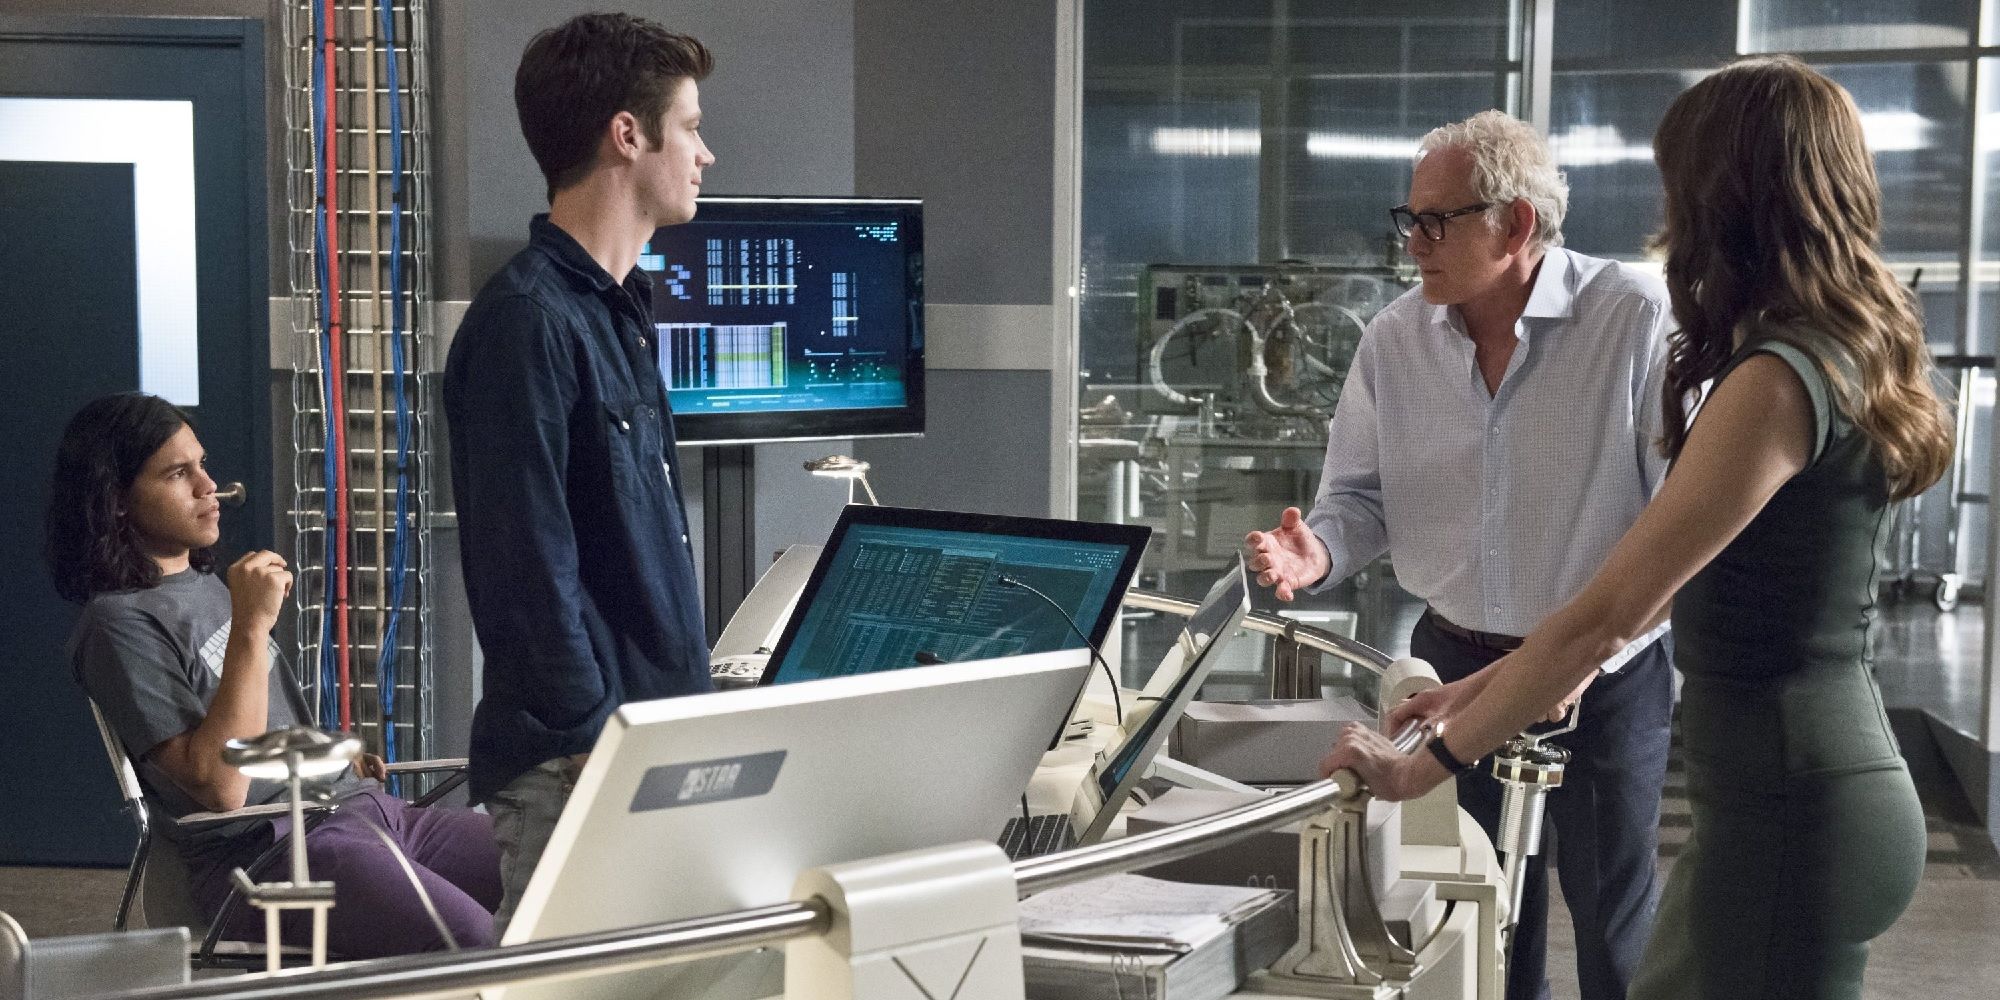 S.T.A.R. Labs in &quot;The Flash&quot;